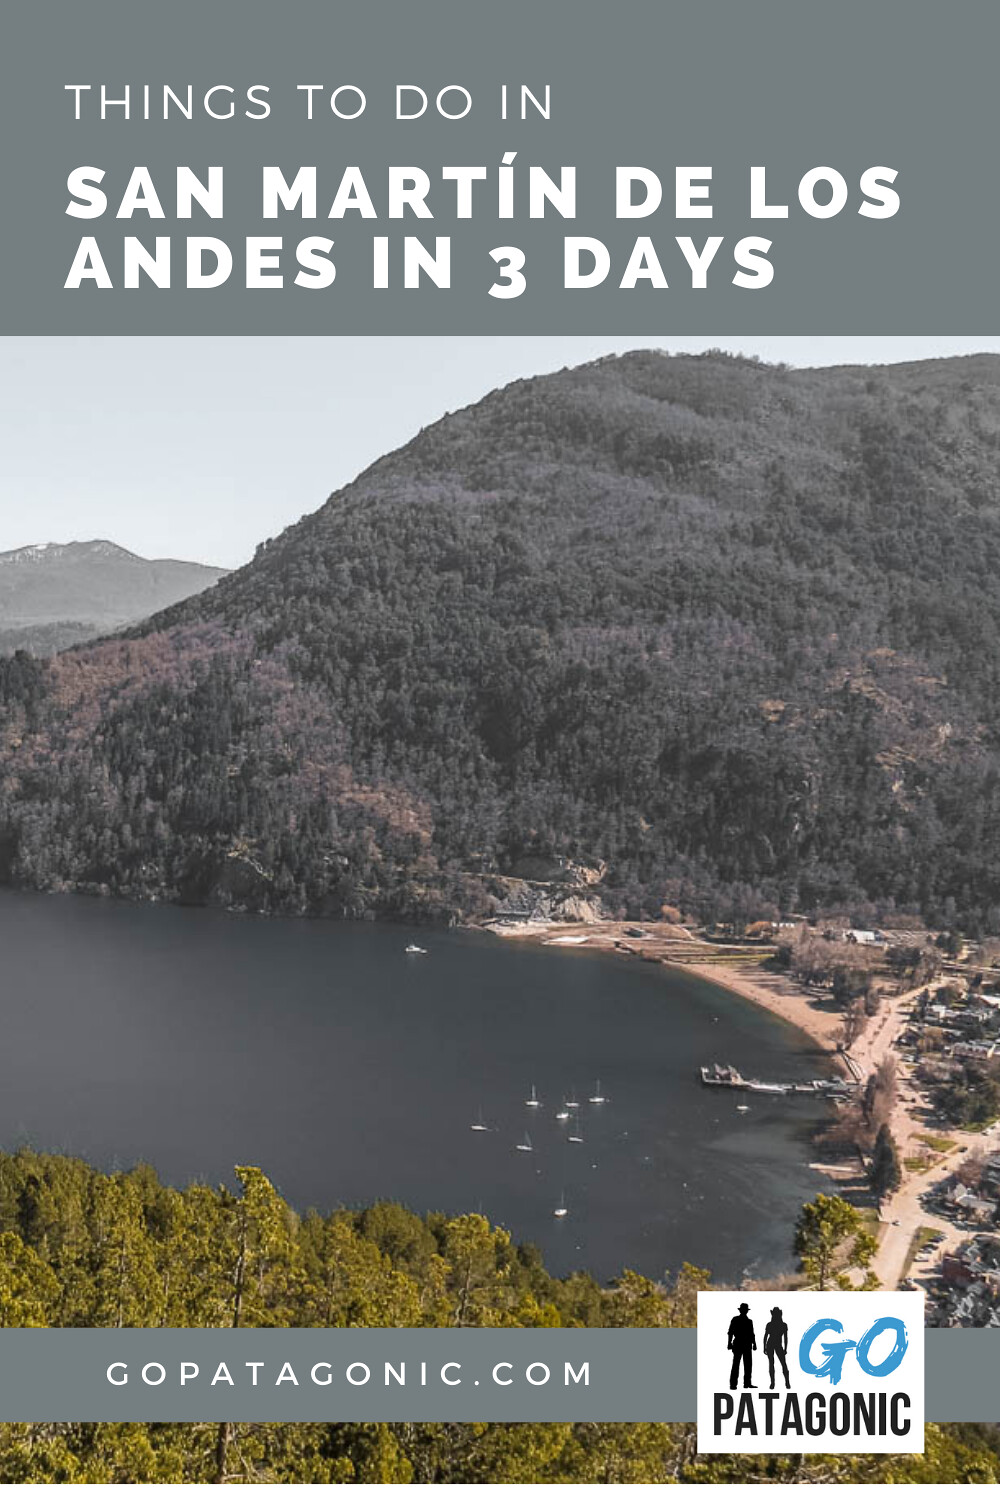 San Martin de los Andes in 3 days, suggested itinerary